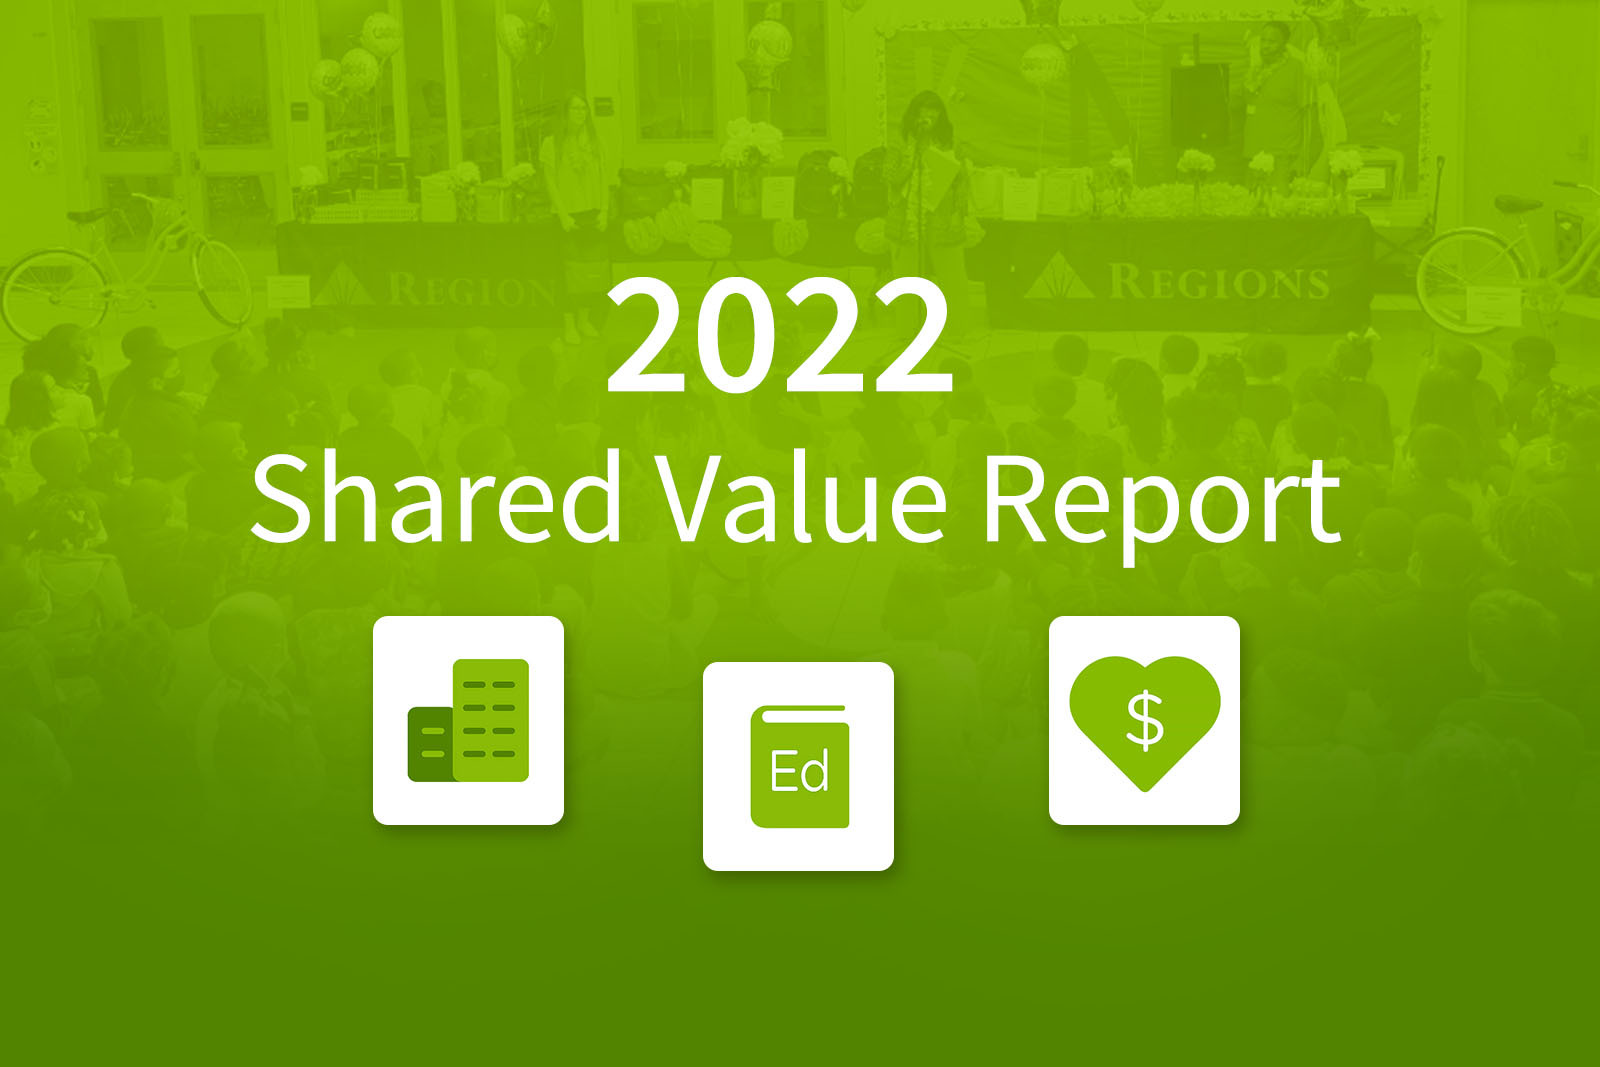 2022 Shared Value Report title with tree icons and event...